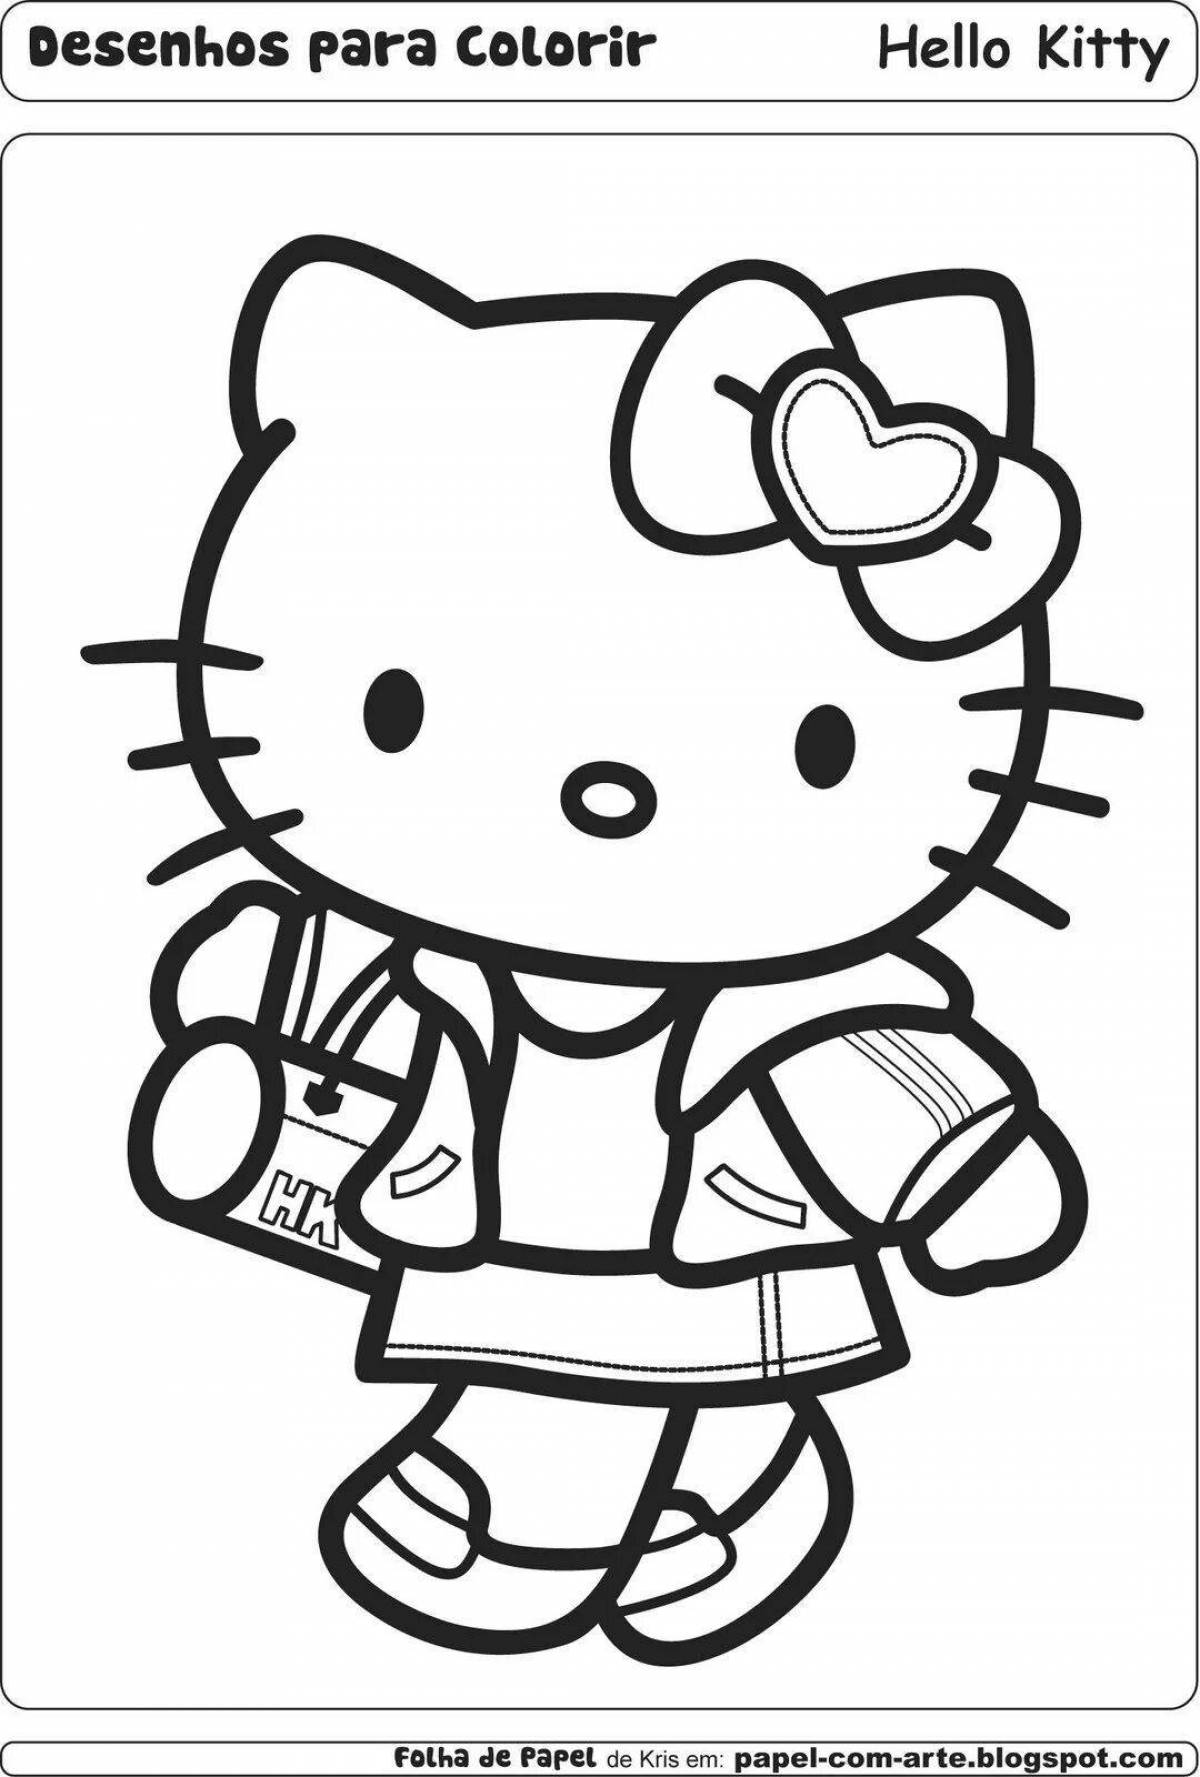 Playful little hello kitty kuromi coloring page